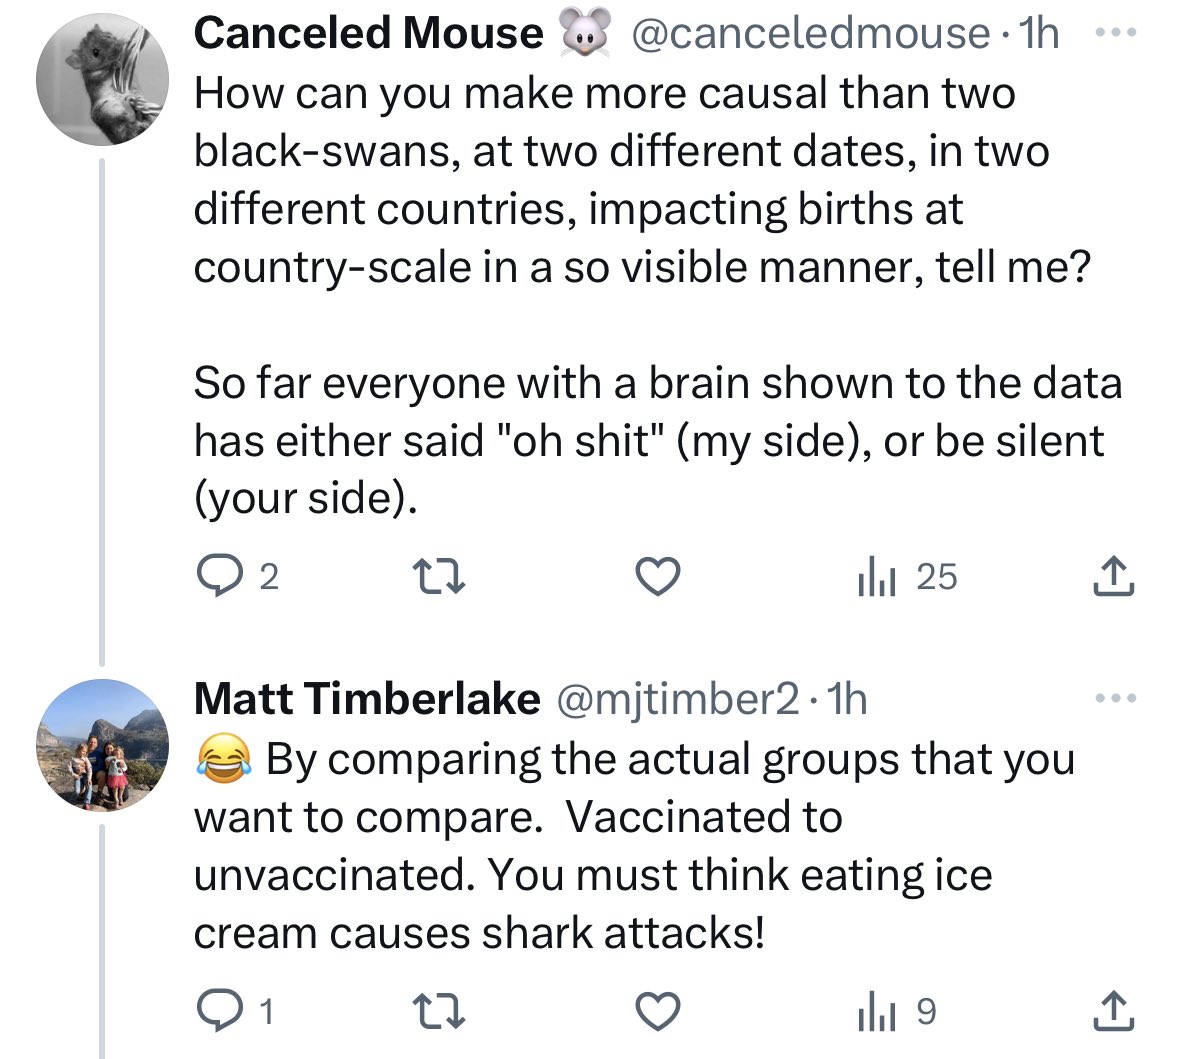 Totally hilarity from this Mouseketeer. “What could better show causation between the vaccinated and unvaccinated than random temporal events?” “How about comparing the vaccinated to the unvaccinated?” “No, that doesn’t work.”